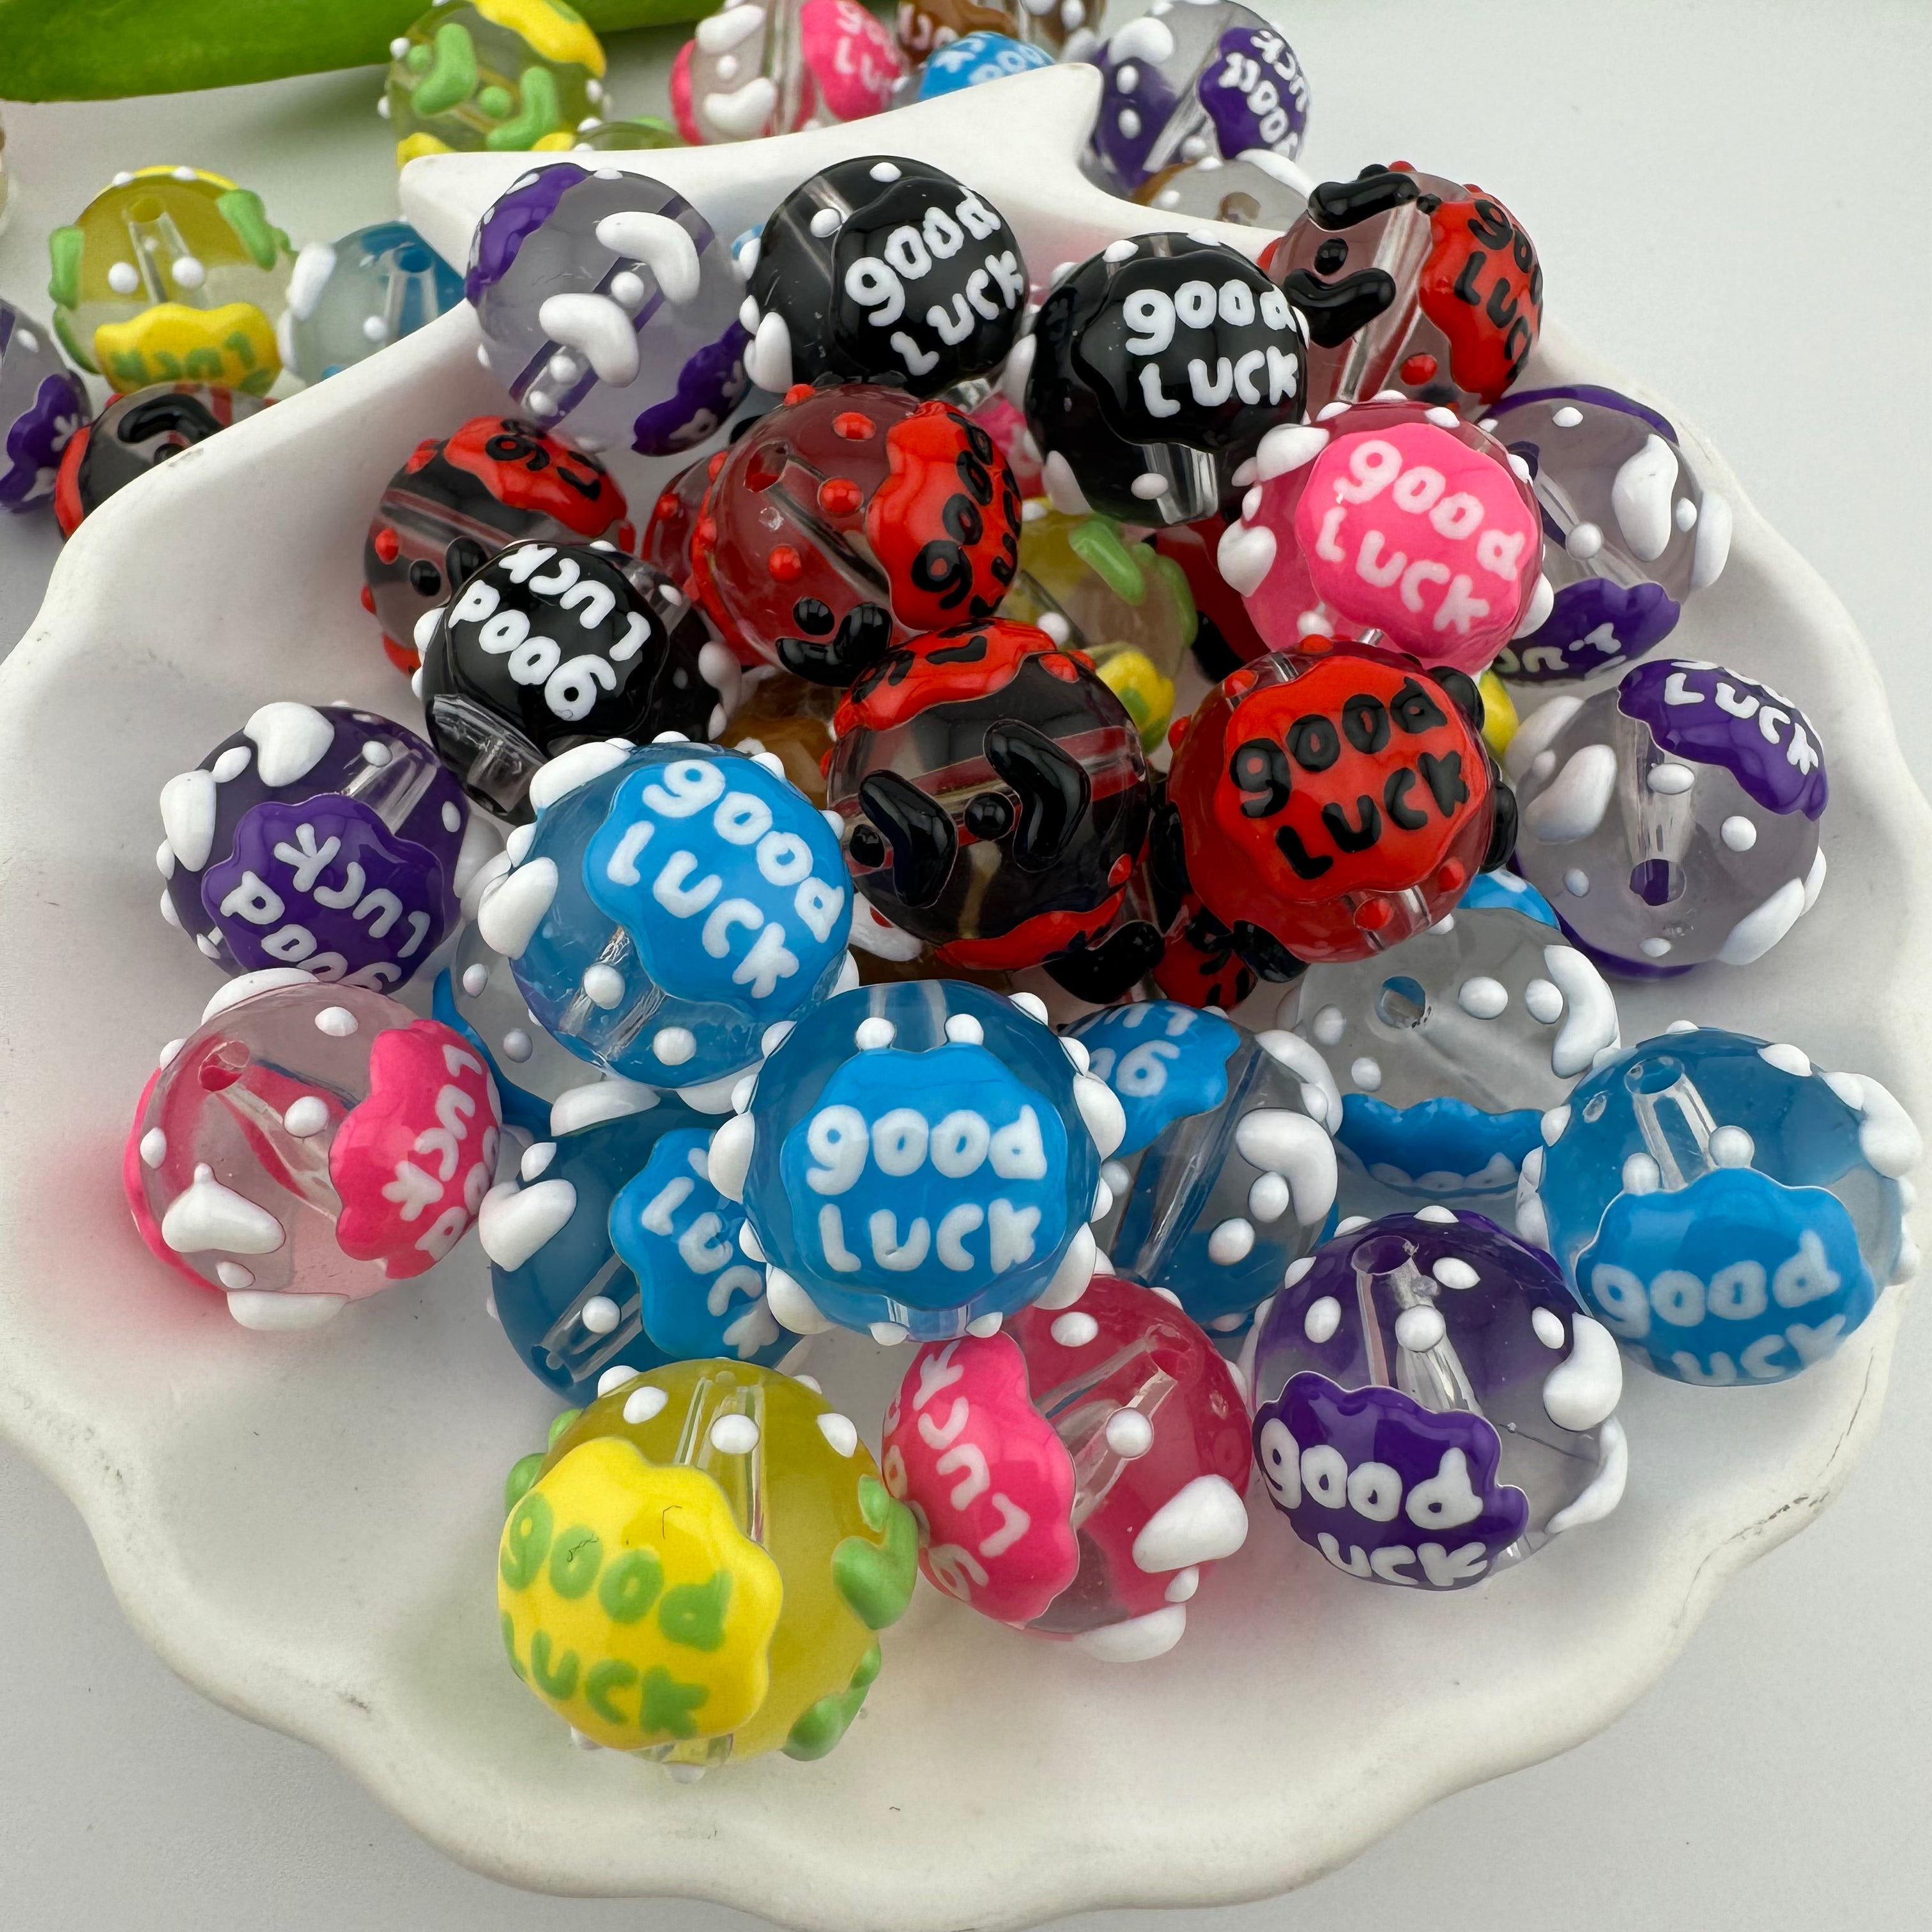 50 Pieces Hand Painted Good Luck English Letter Words Resin Beads